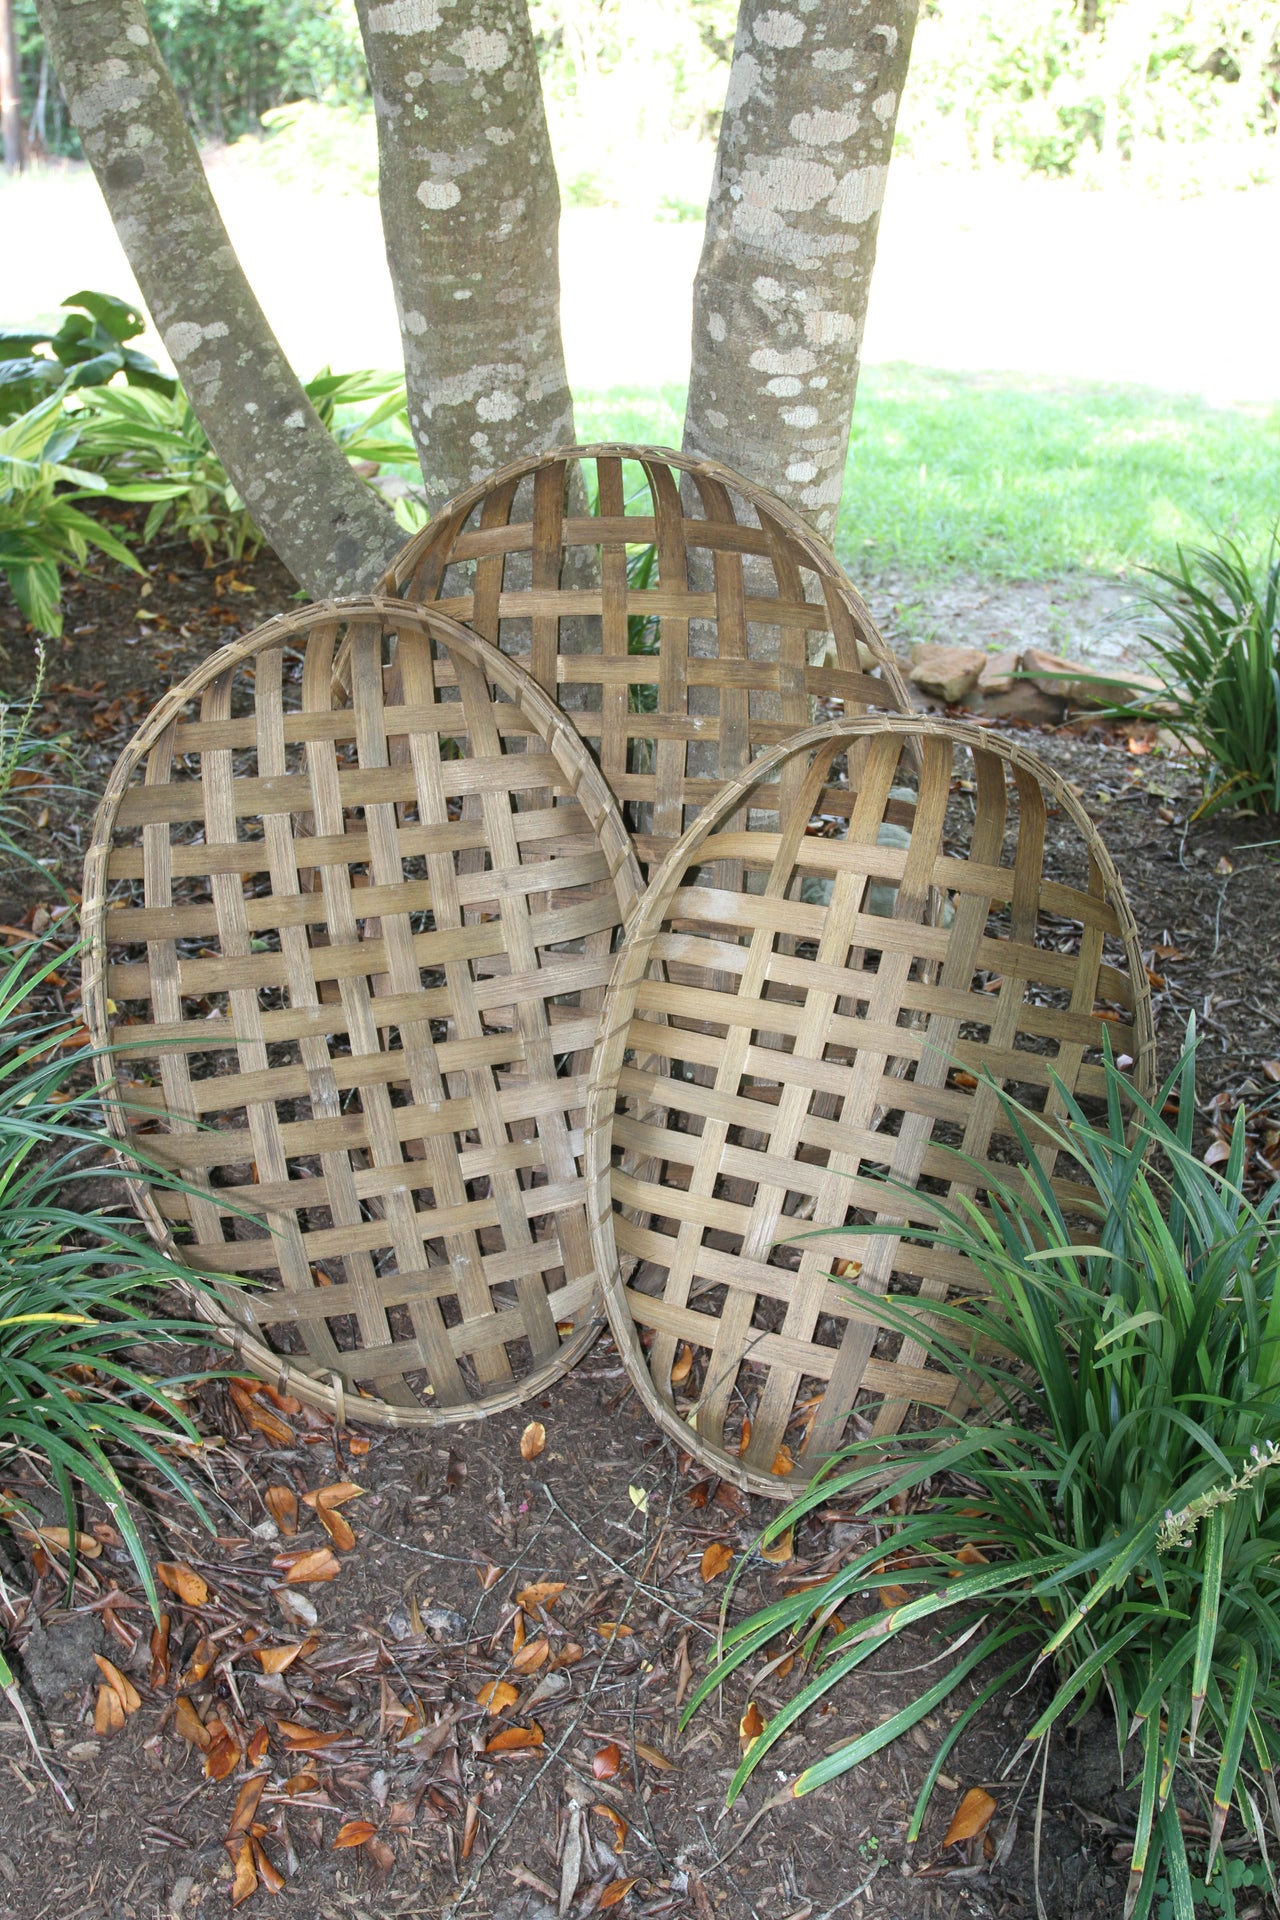 Gigantic Nested Tobacco Baskets - Set of 3, Uses include crafting projects, wall hangings, Christmas gifts, Wreath making and so much more!  SP-OMR